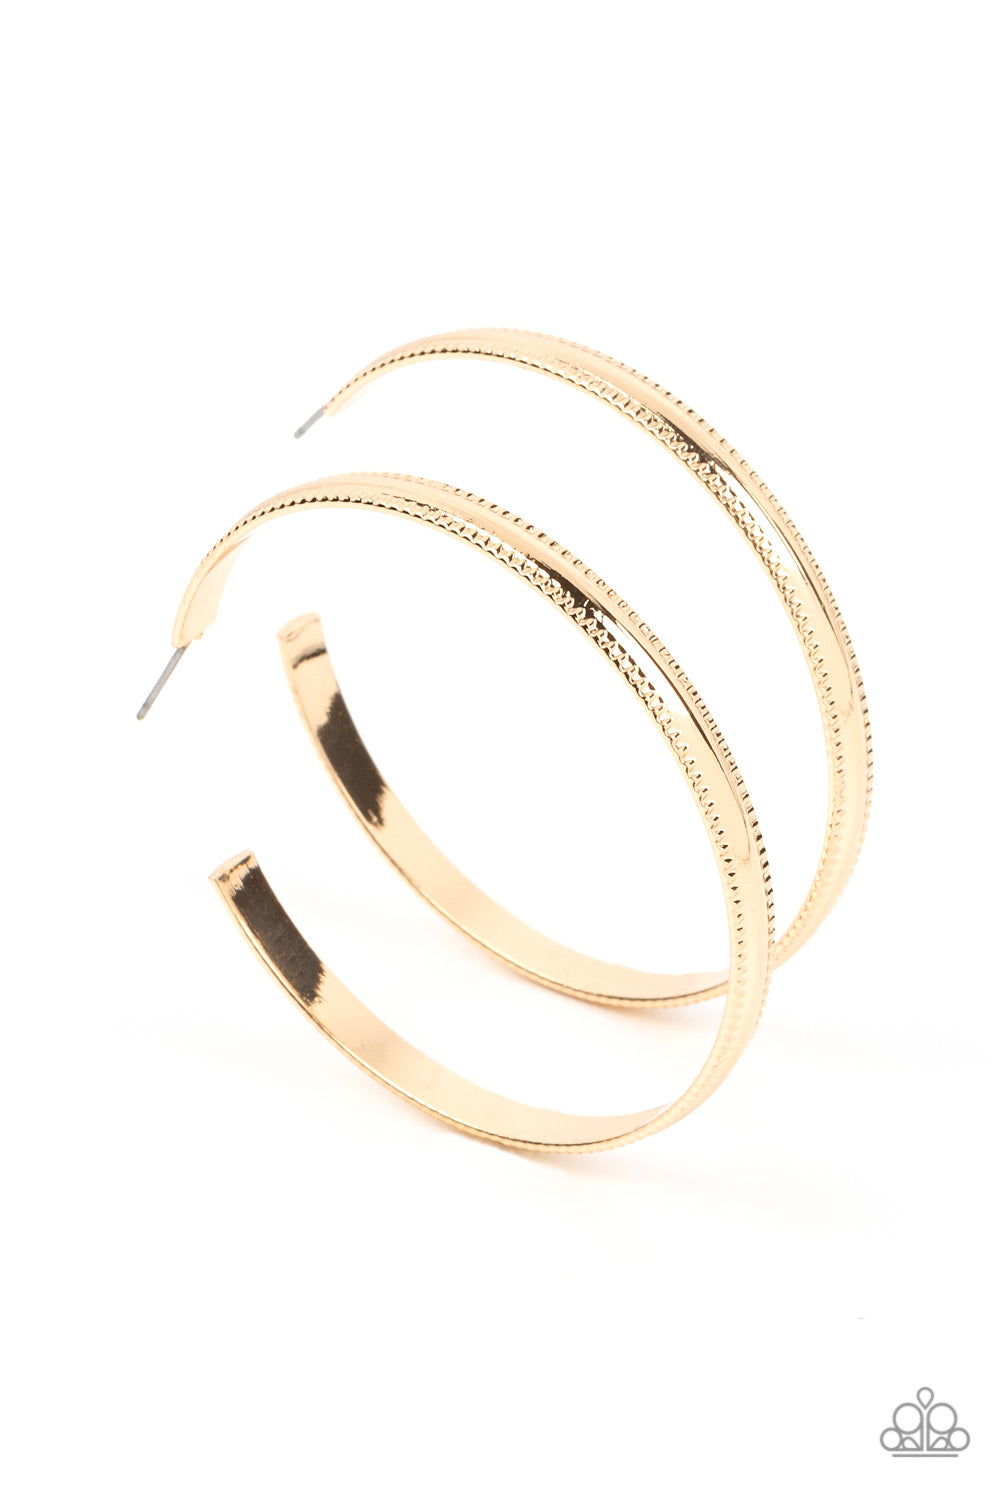 Monochromatic Magnetism Gold Hoop Earring - Paparazzi Accessories   Bordered in gritty ribbons of texture, a flat gold bar curves into an oversized hoop for an intense industrial statement. Earring attaches to a standard post fitting. Hoop measures approximately 2 1/4" in diameter.  Sold as one pair of hoop earrings.